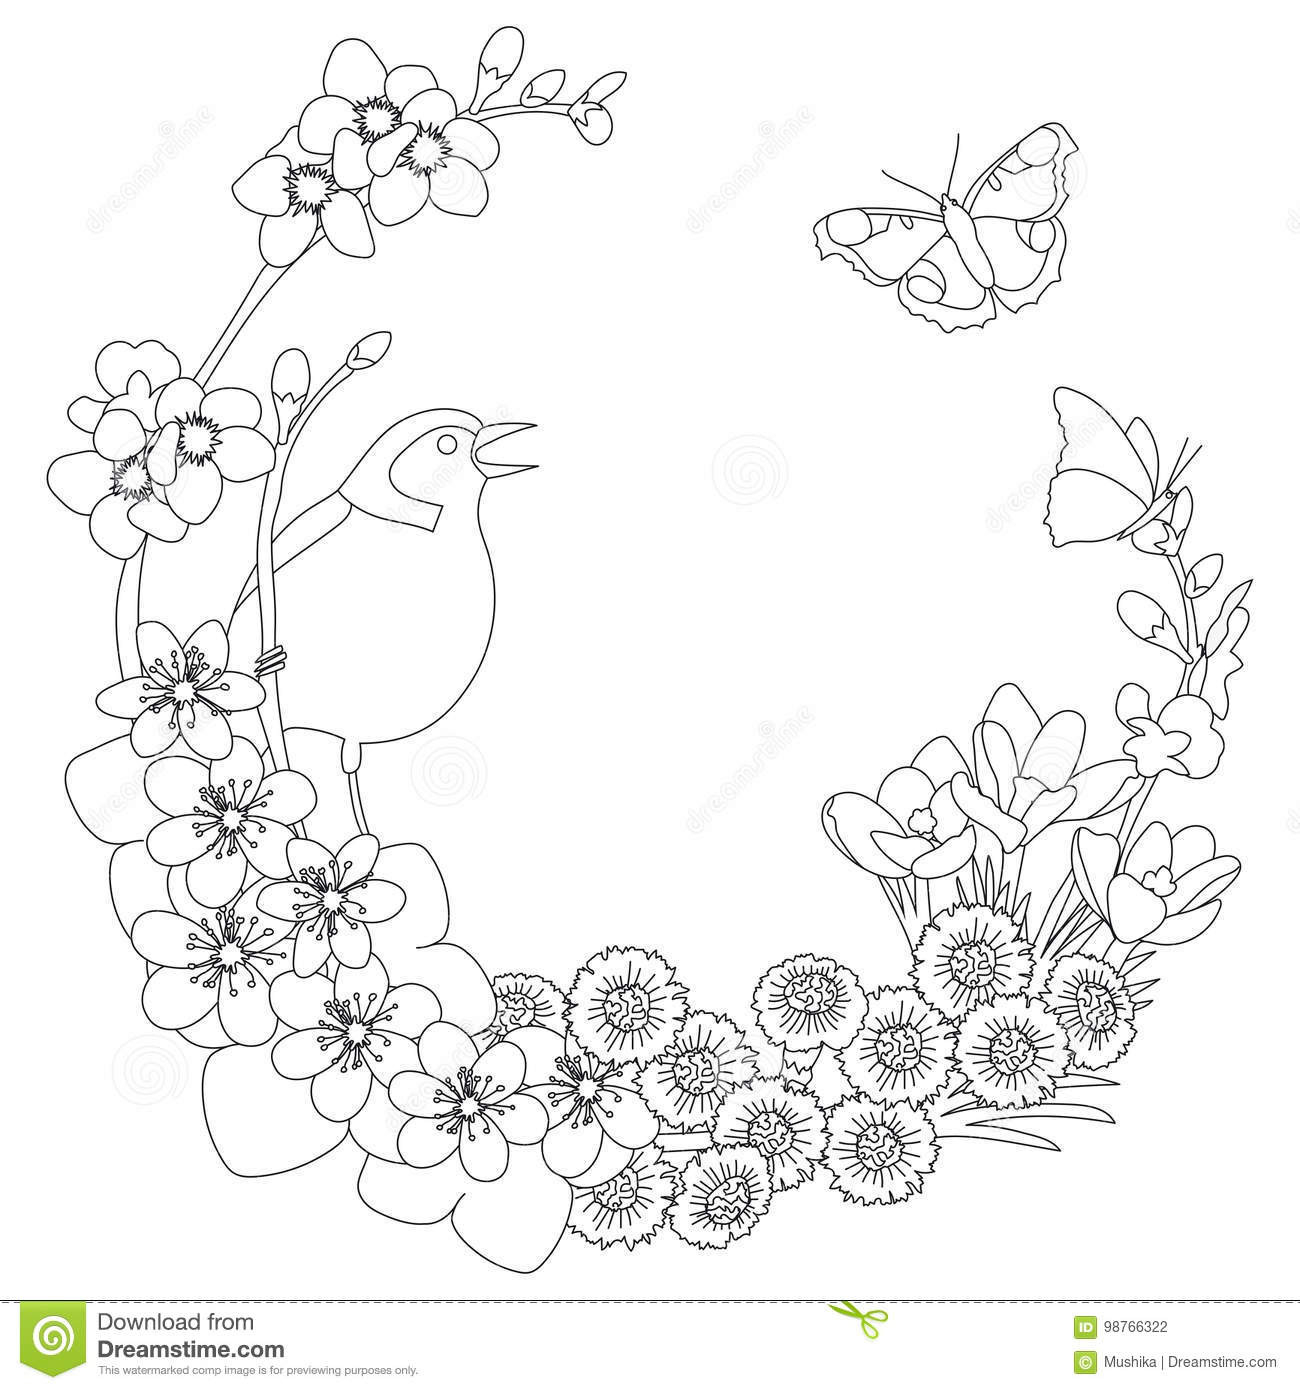 Butterfly Outline Coloring Page Unique Butterfly Outline Coloring Sheet Cleanty